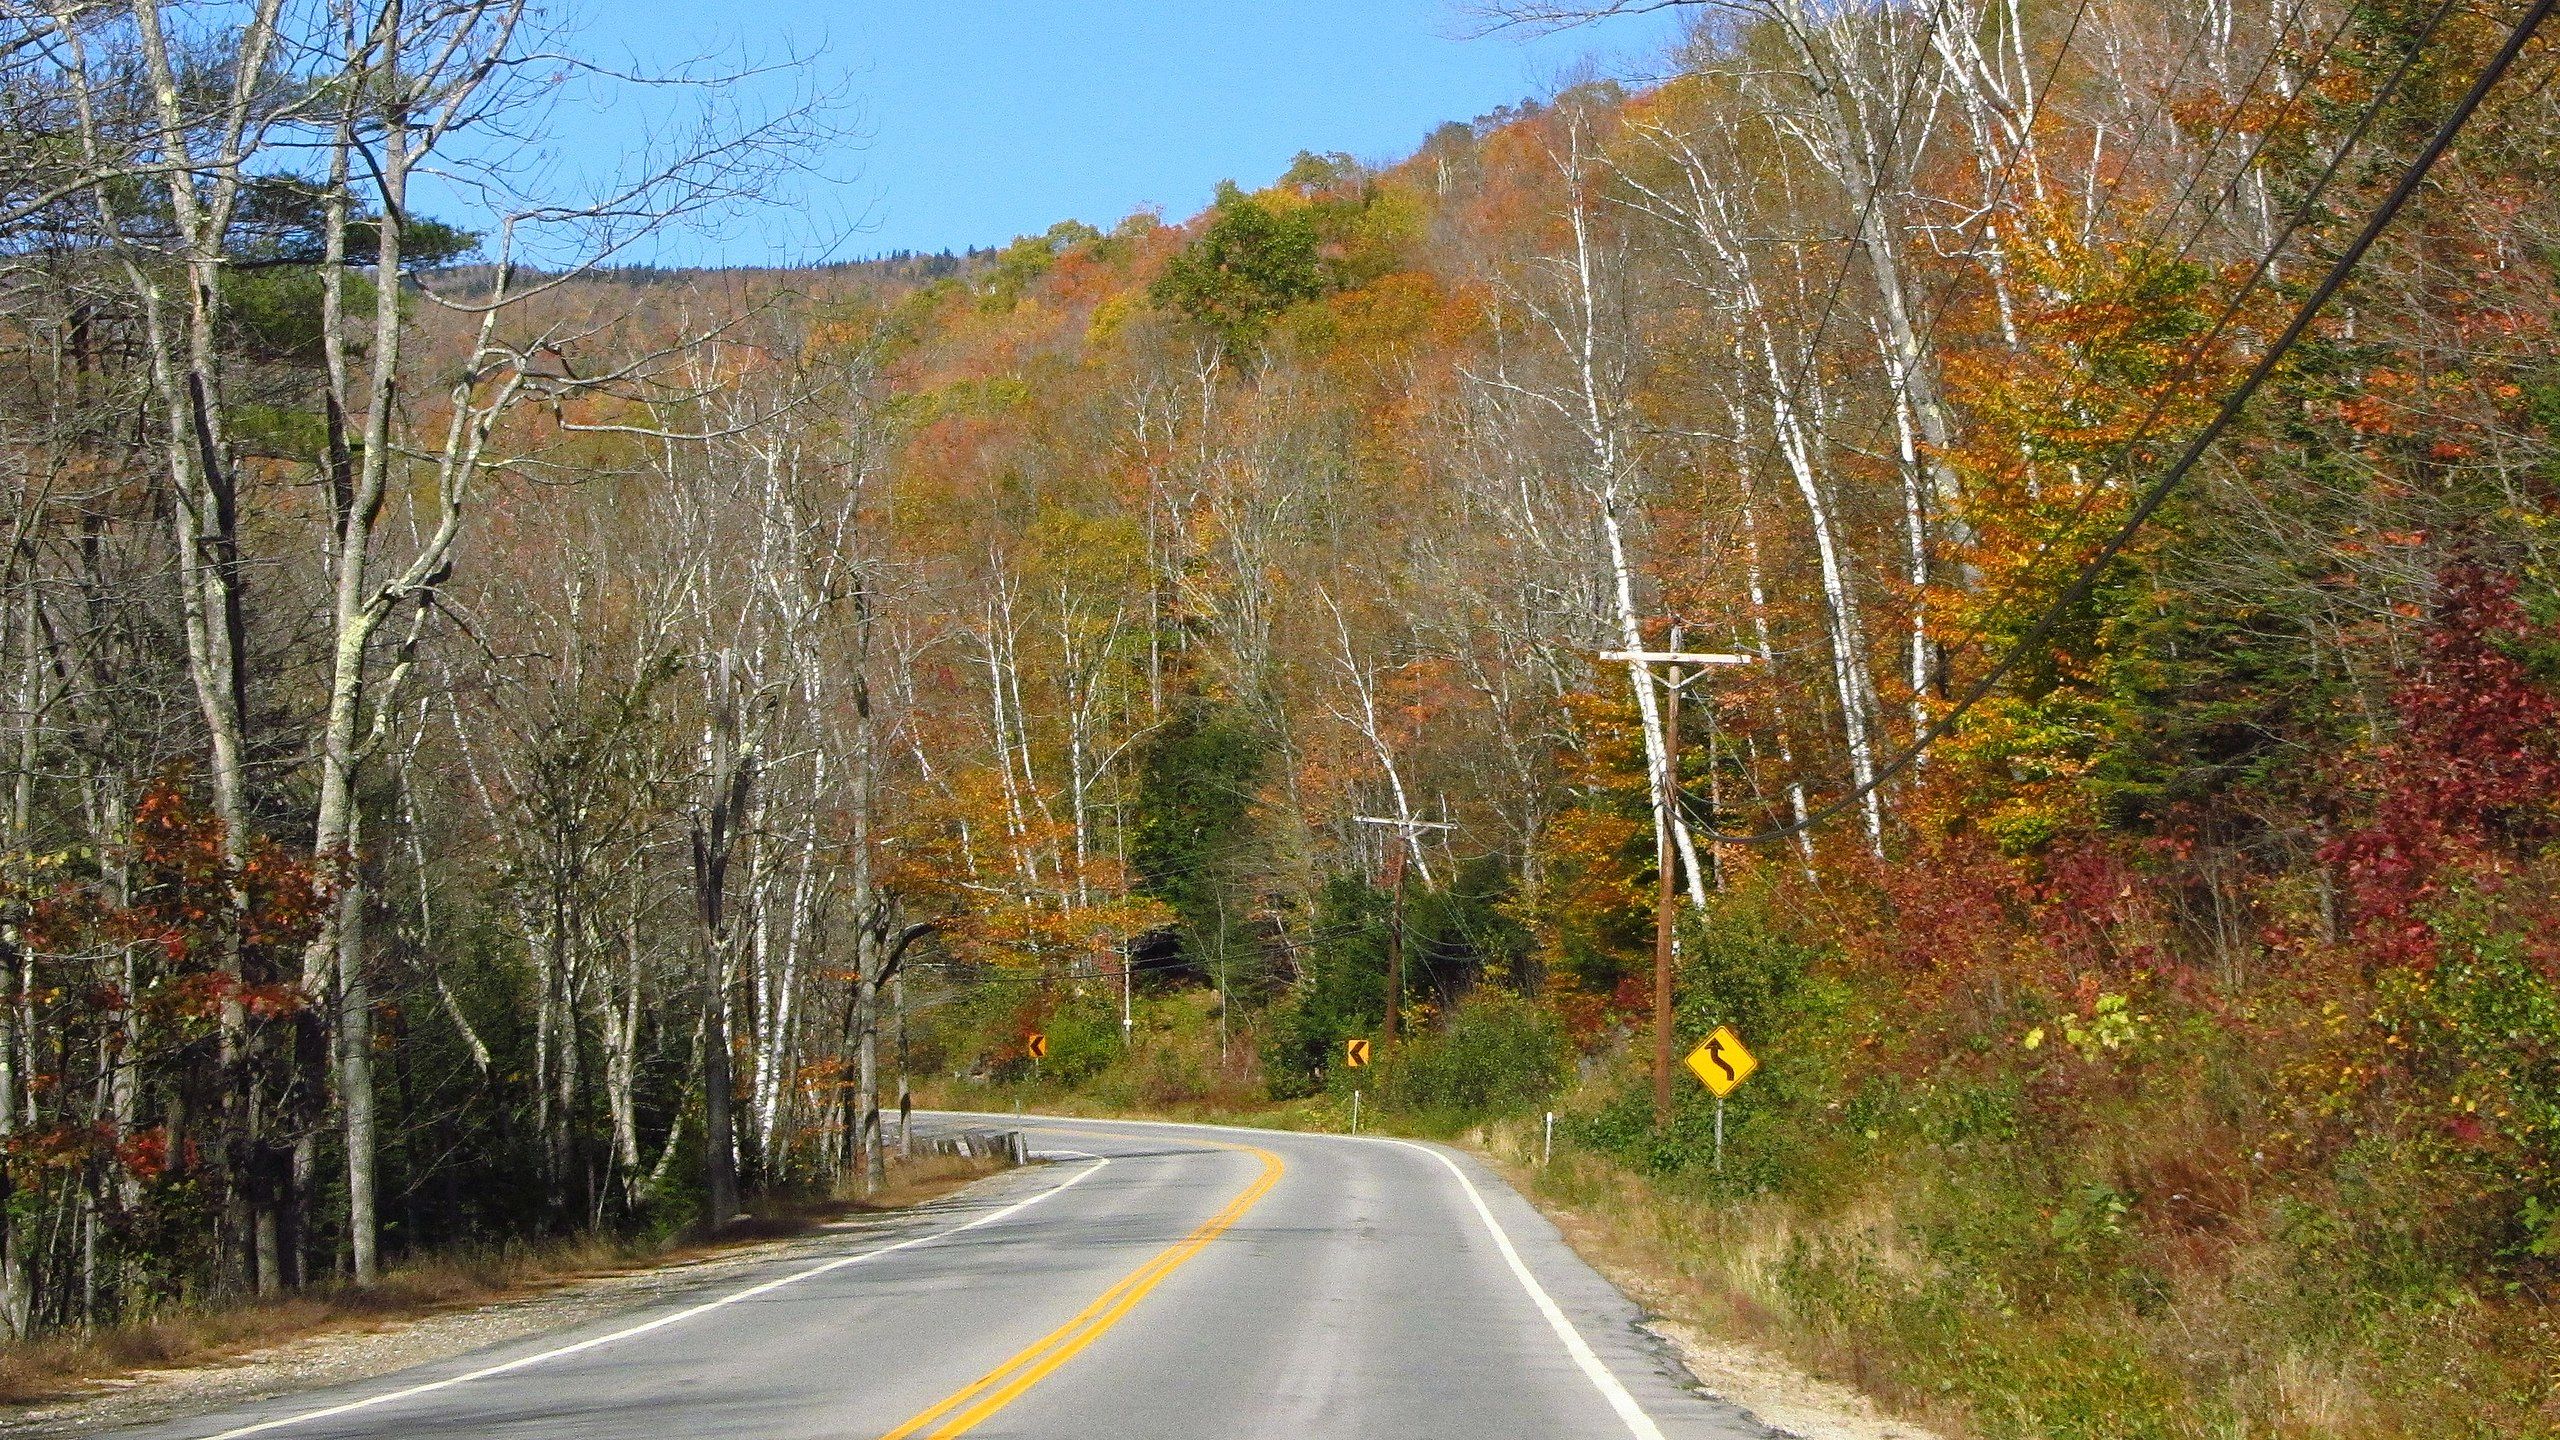 Pinkham Notch Rd In Jackson, one of the least-crowded towns to visit on the East Coast during the fall